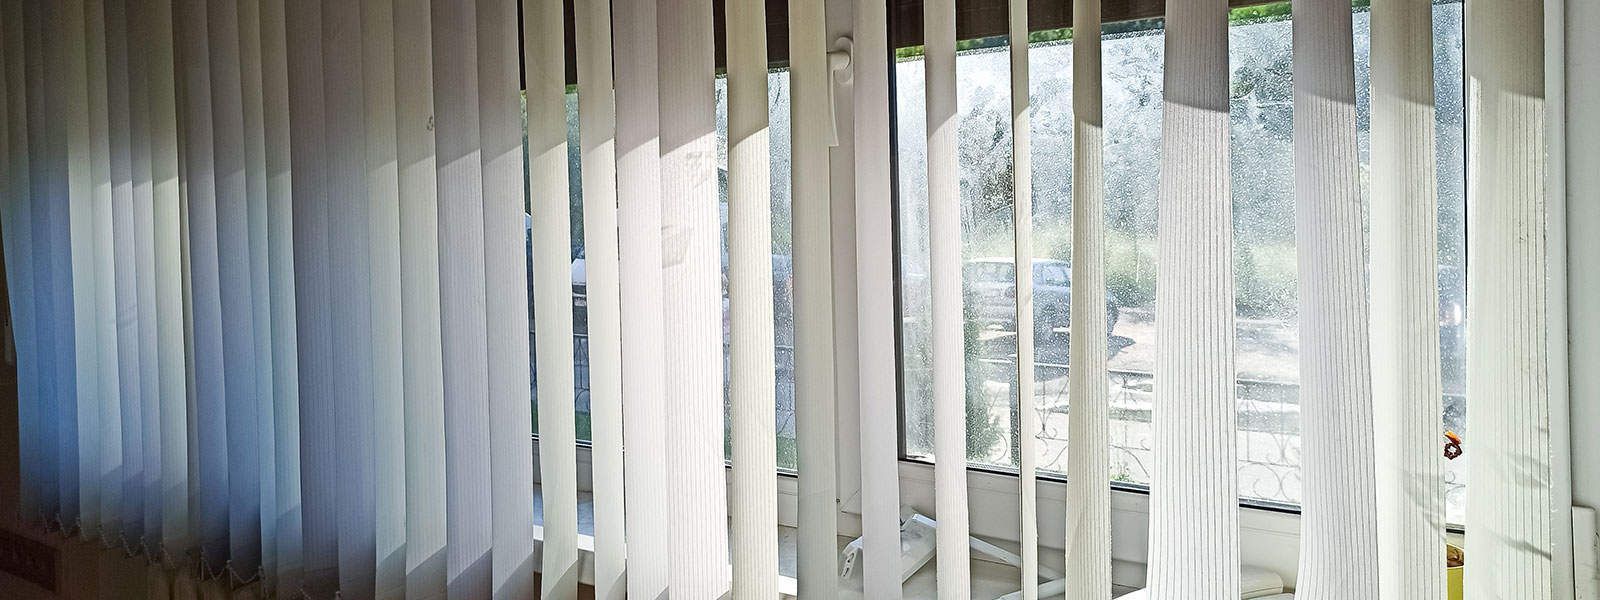 blinds-vs-curtains-what-should-you-choose-for-your-home